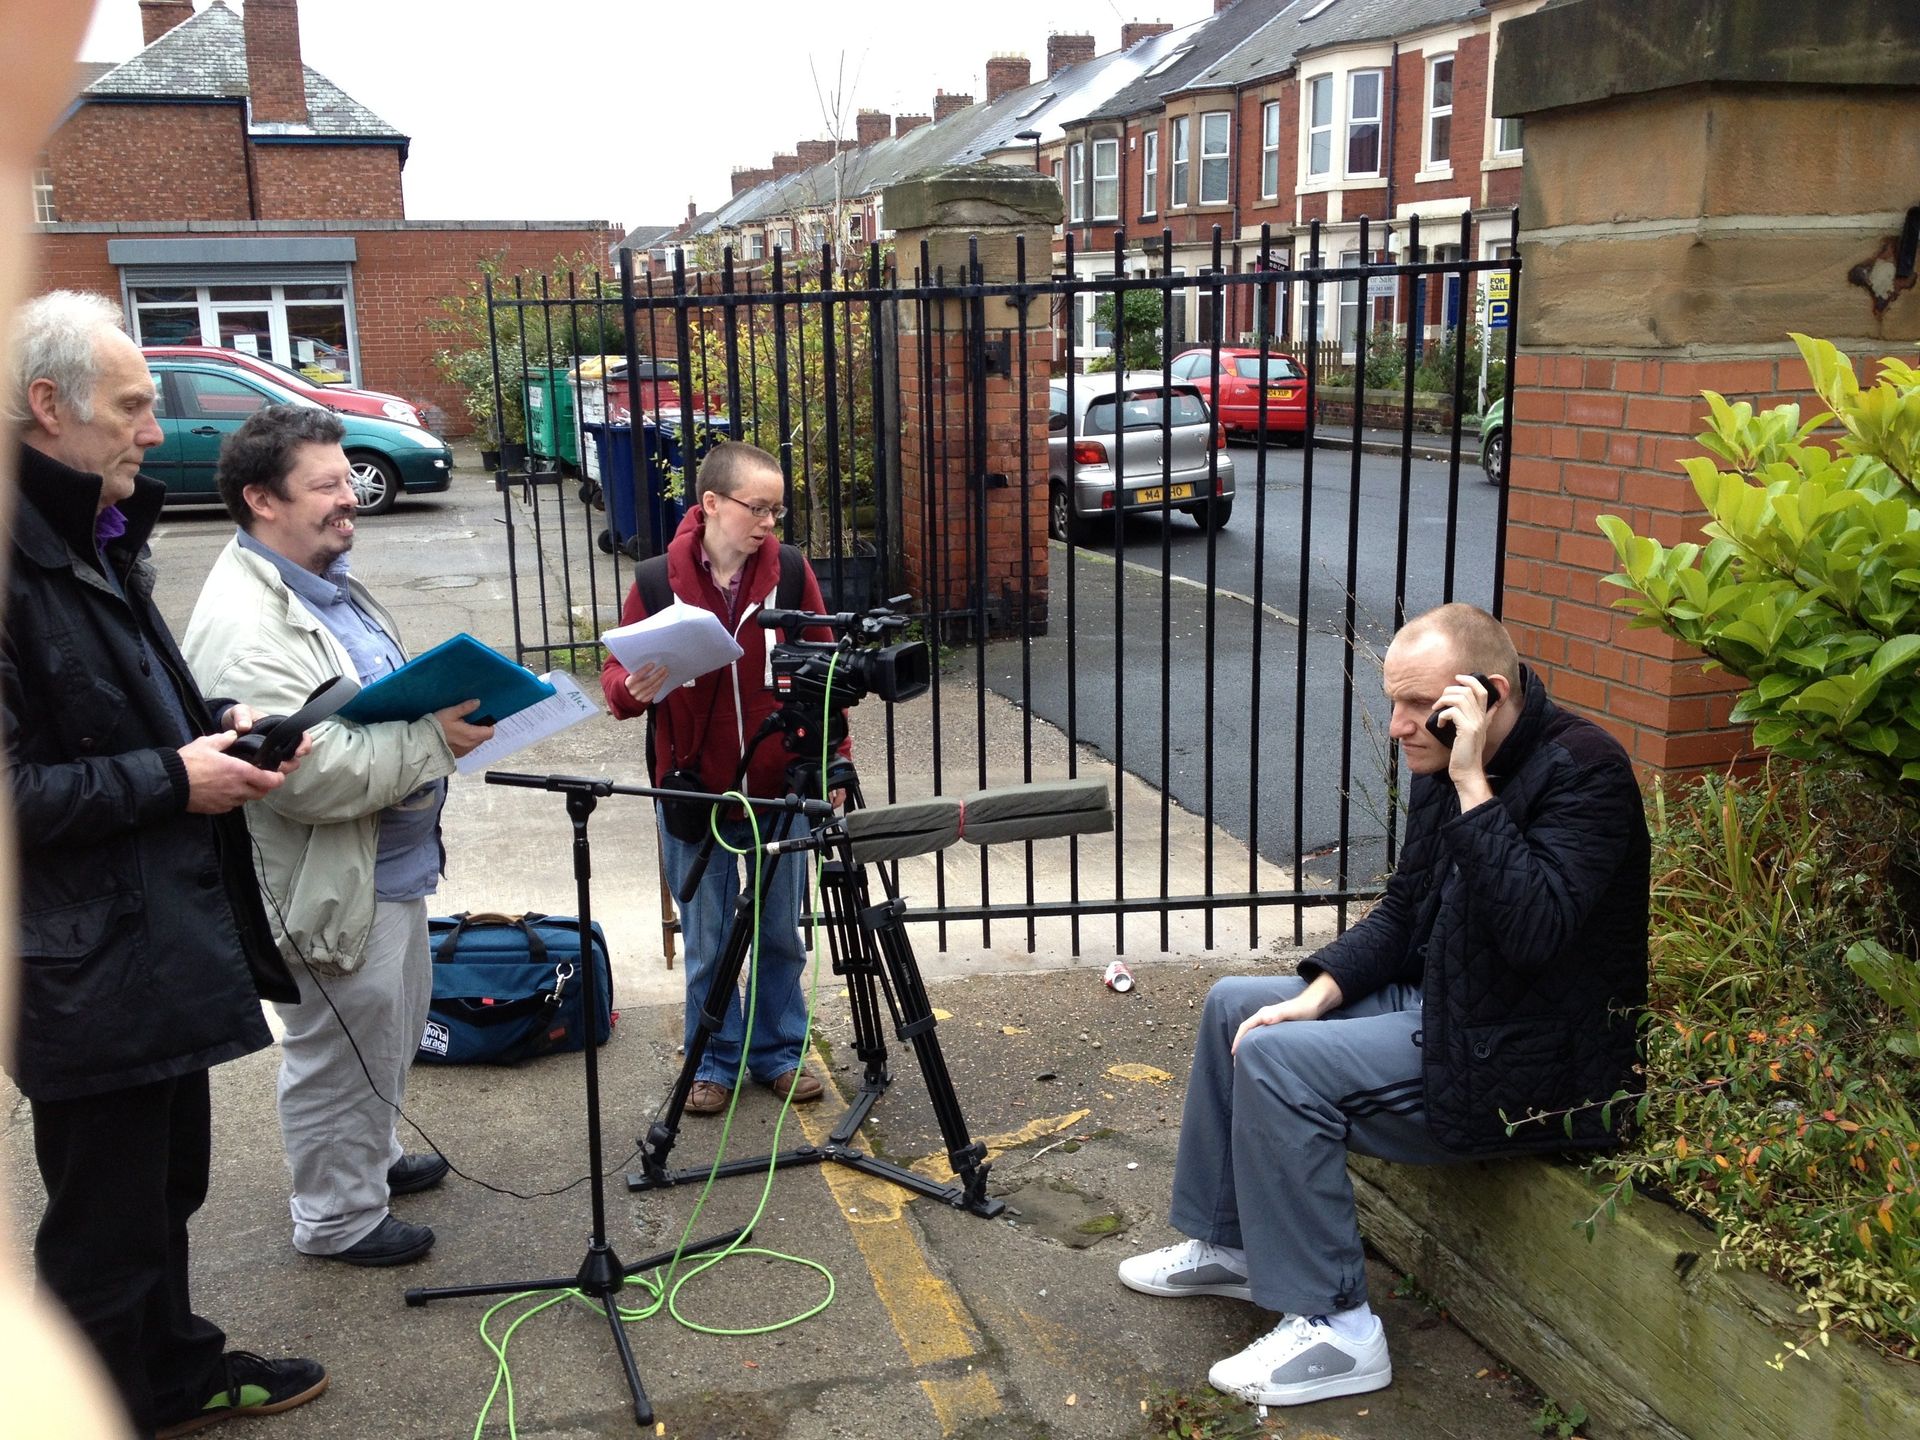 People with learning disabilities and autistic people making a film. One actor, one person behind a camera  and someone with a microphone